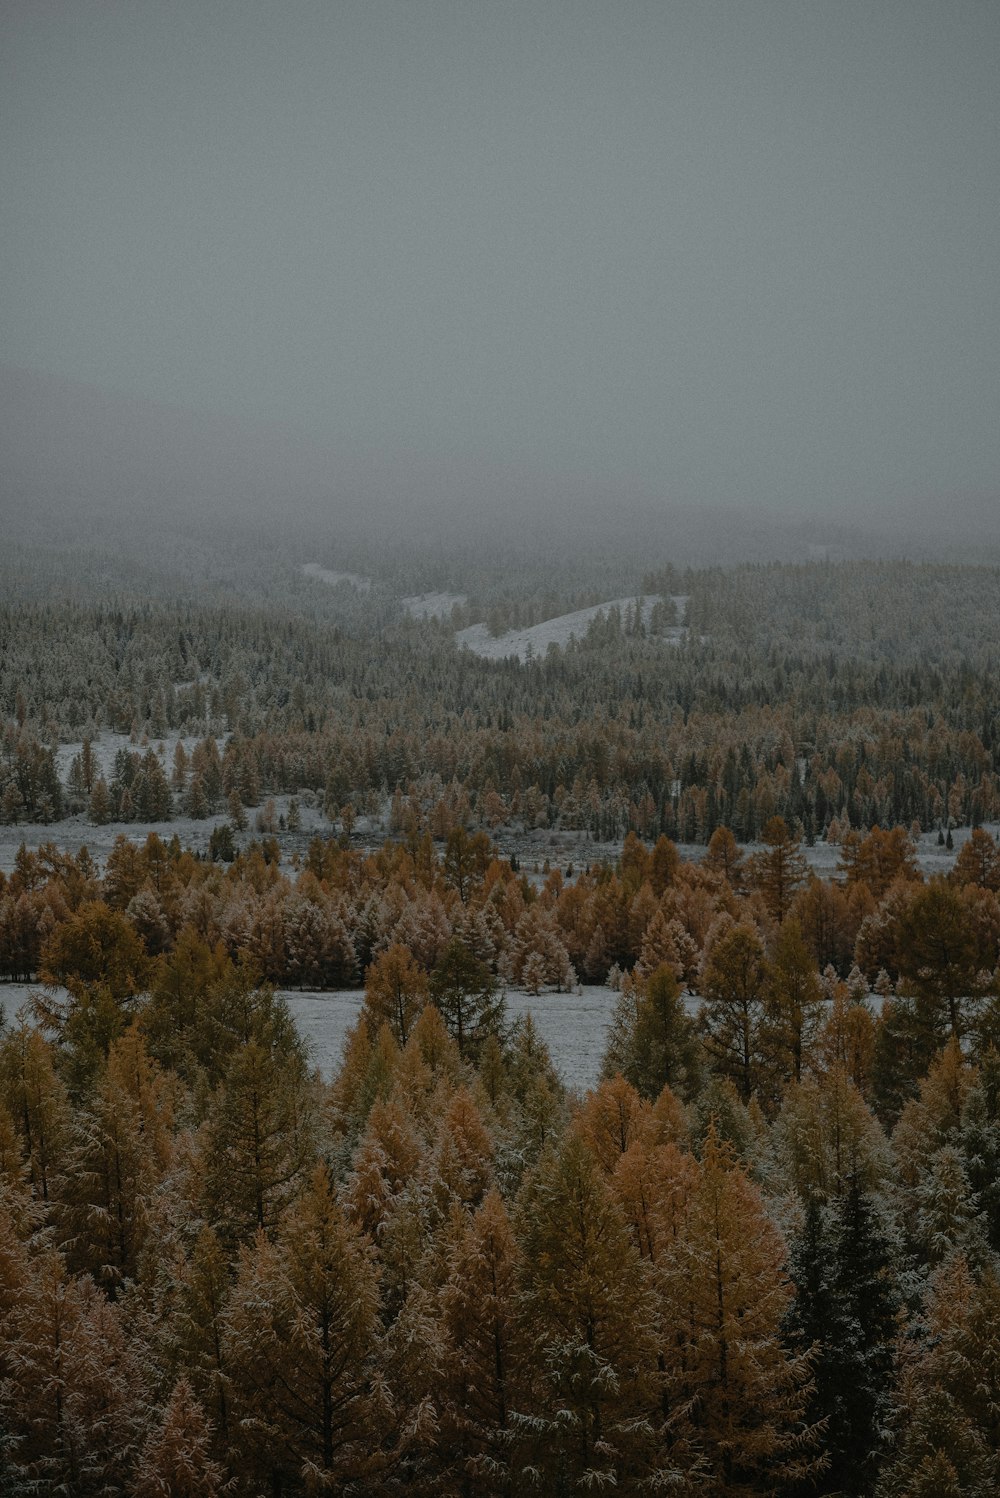 a view of a snowy forest with trees in the foreground